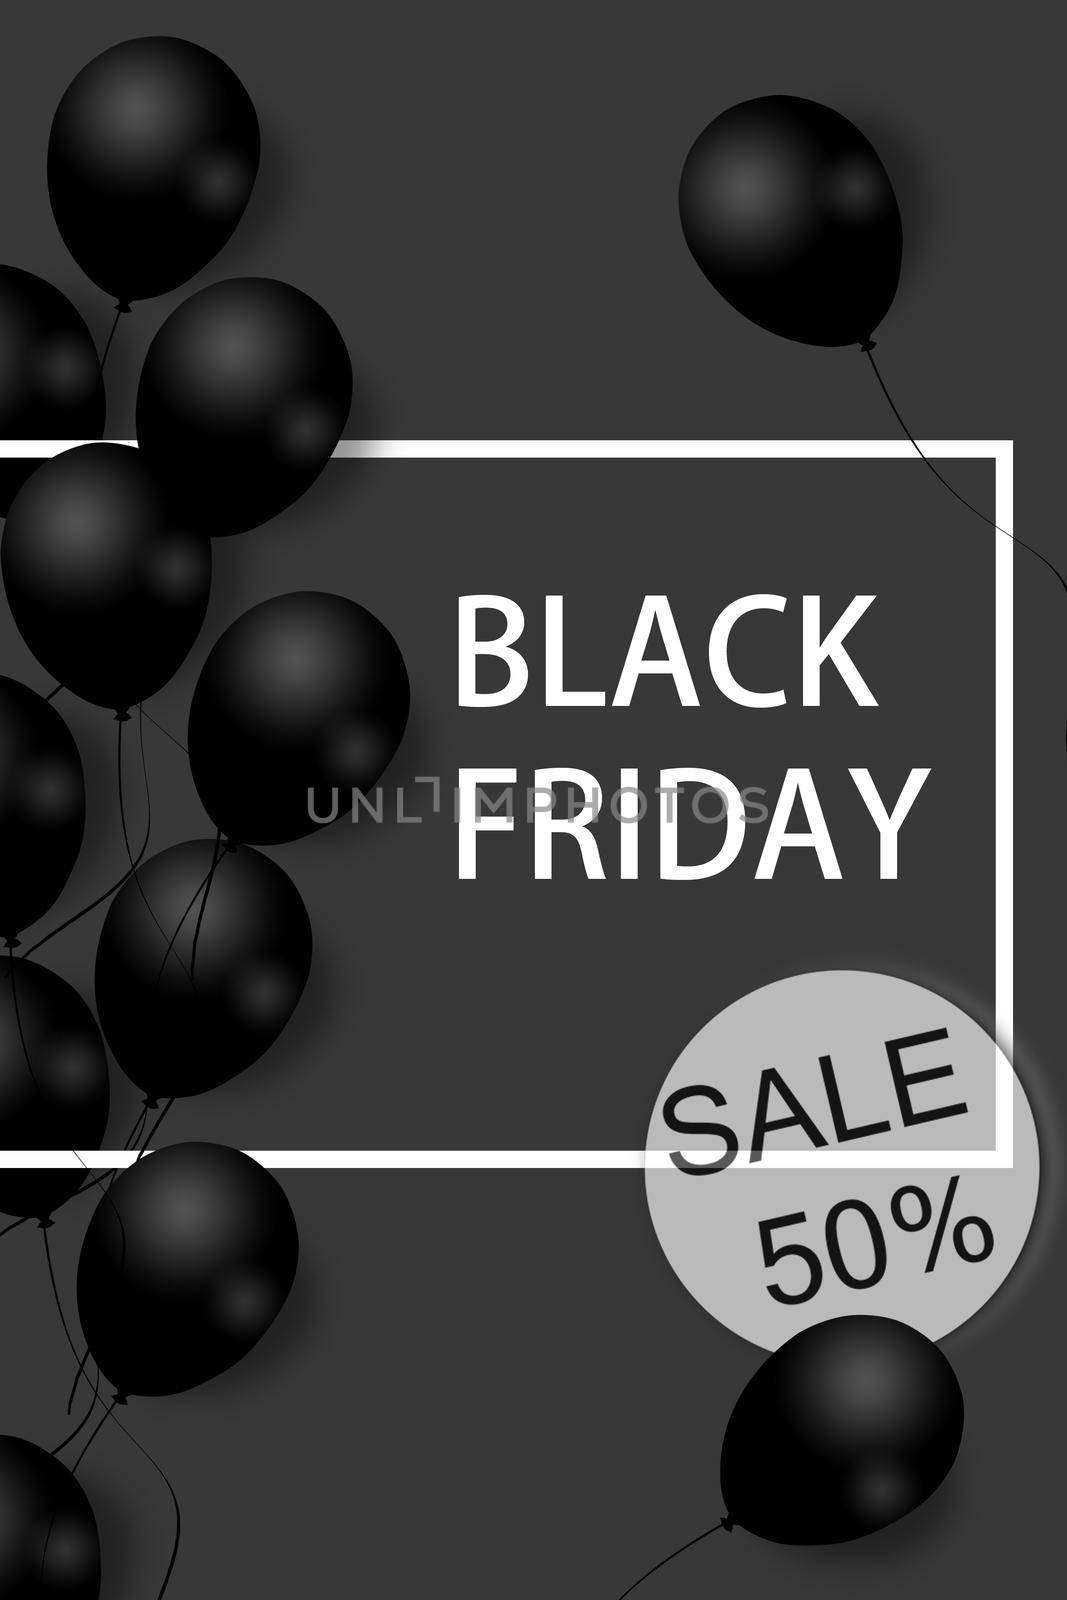 Black Friday Sale Poster with black balloons on gray background with square frame. Illustration. by nazarovsergey